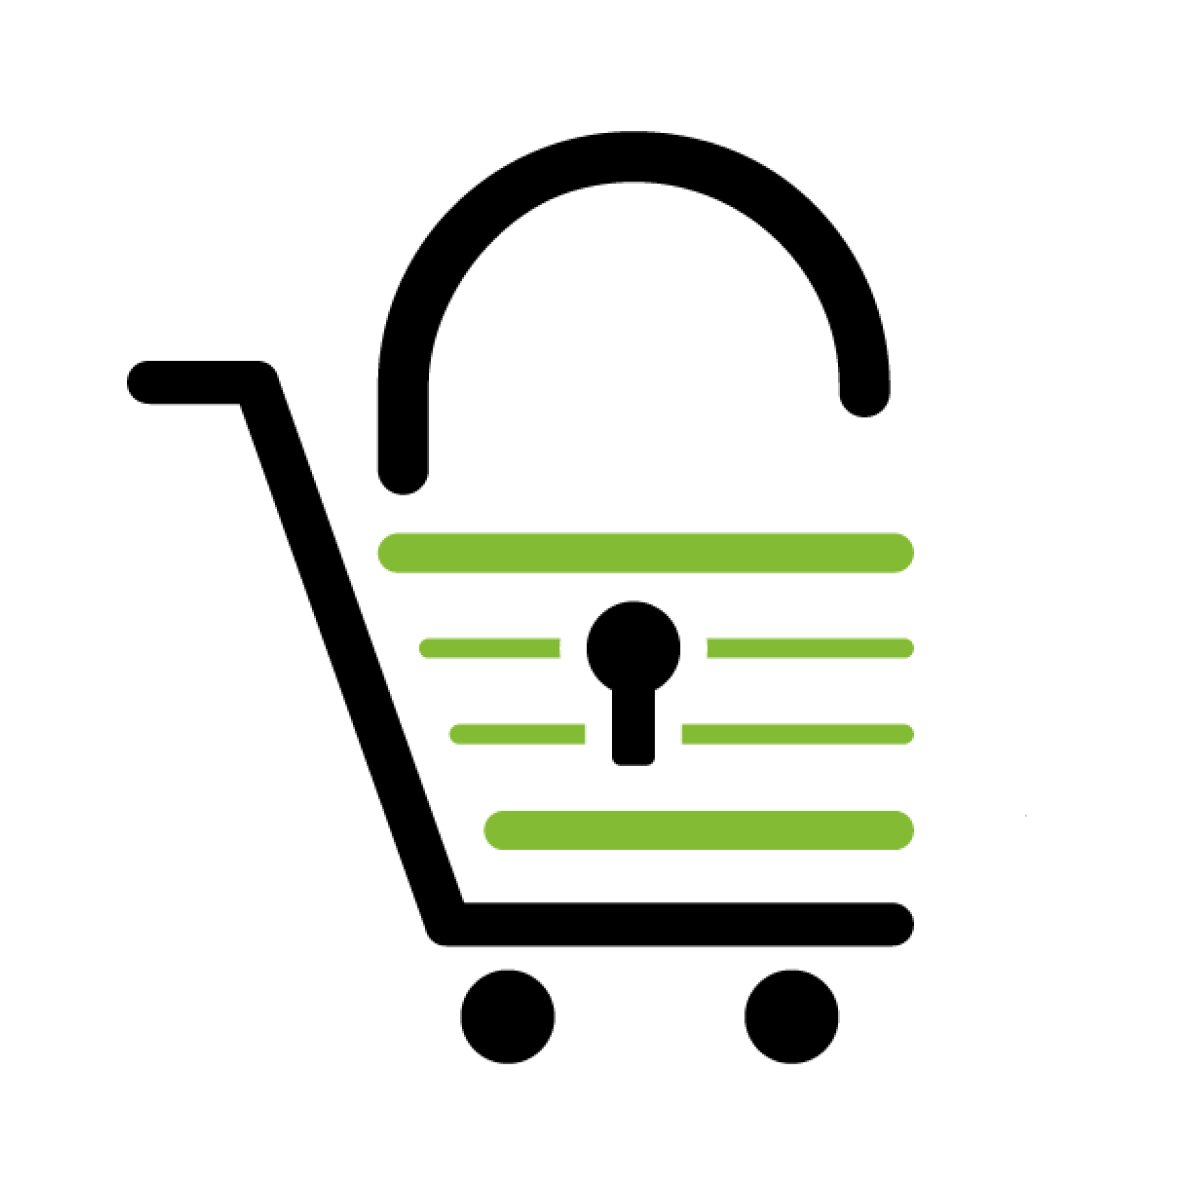 Hire Shopify Experts to integrate SECURECOMMERCEâ€‘Fraud Detection app into a Shopify store